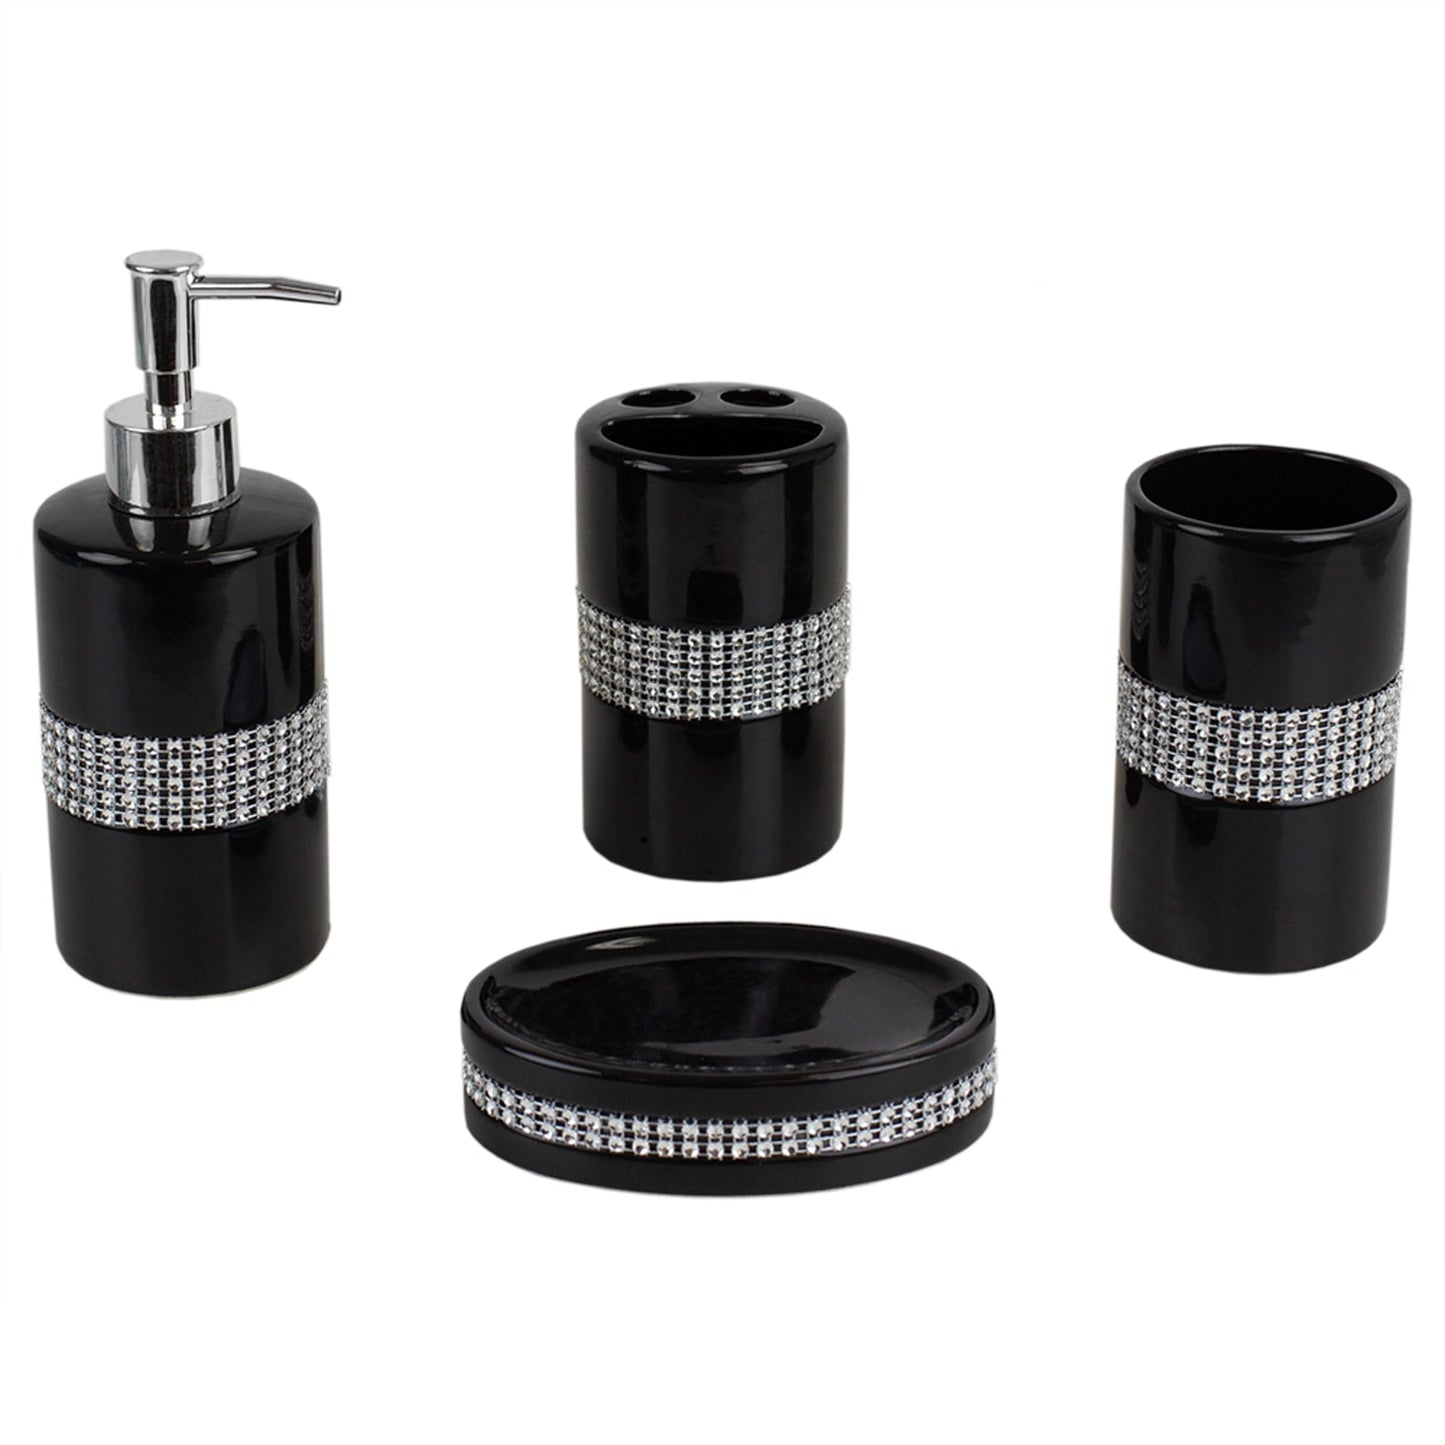 4 Piece  Luxury Bath Accessory Set with Stunning Sequin Accents, Black